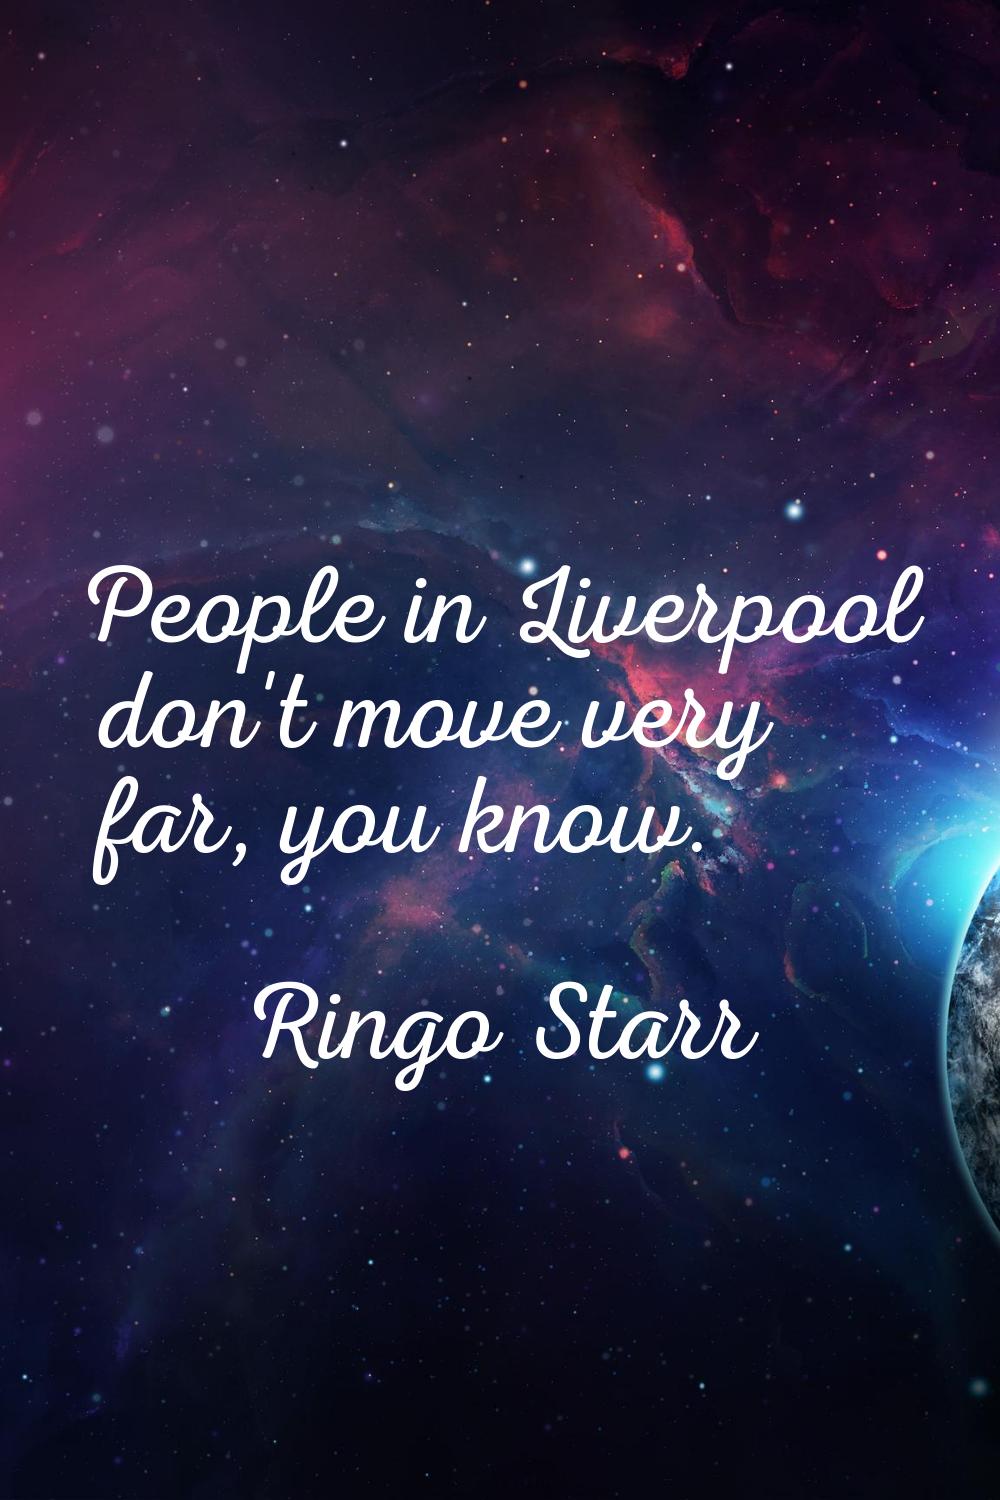 People in Liverpool don't move very far, you know.